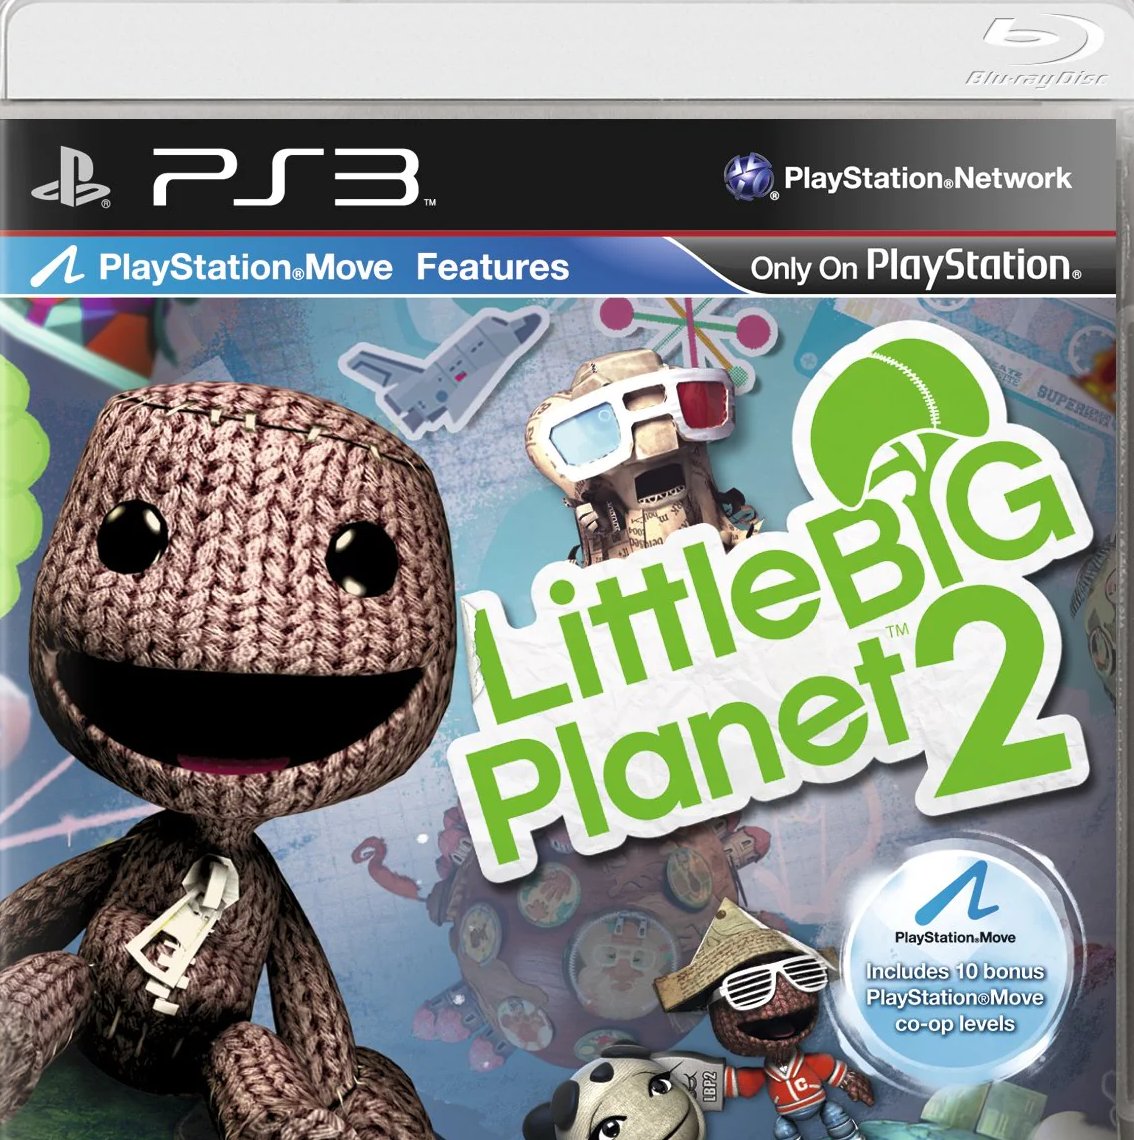 Game | Sony Playstation PS3 | LittleBigPlanet 2